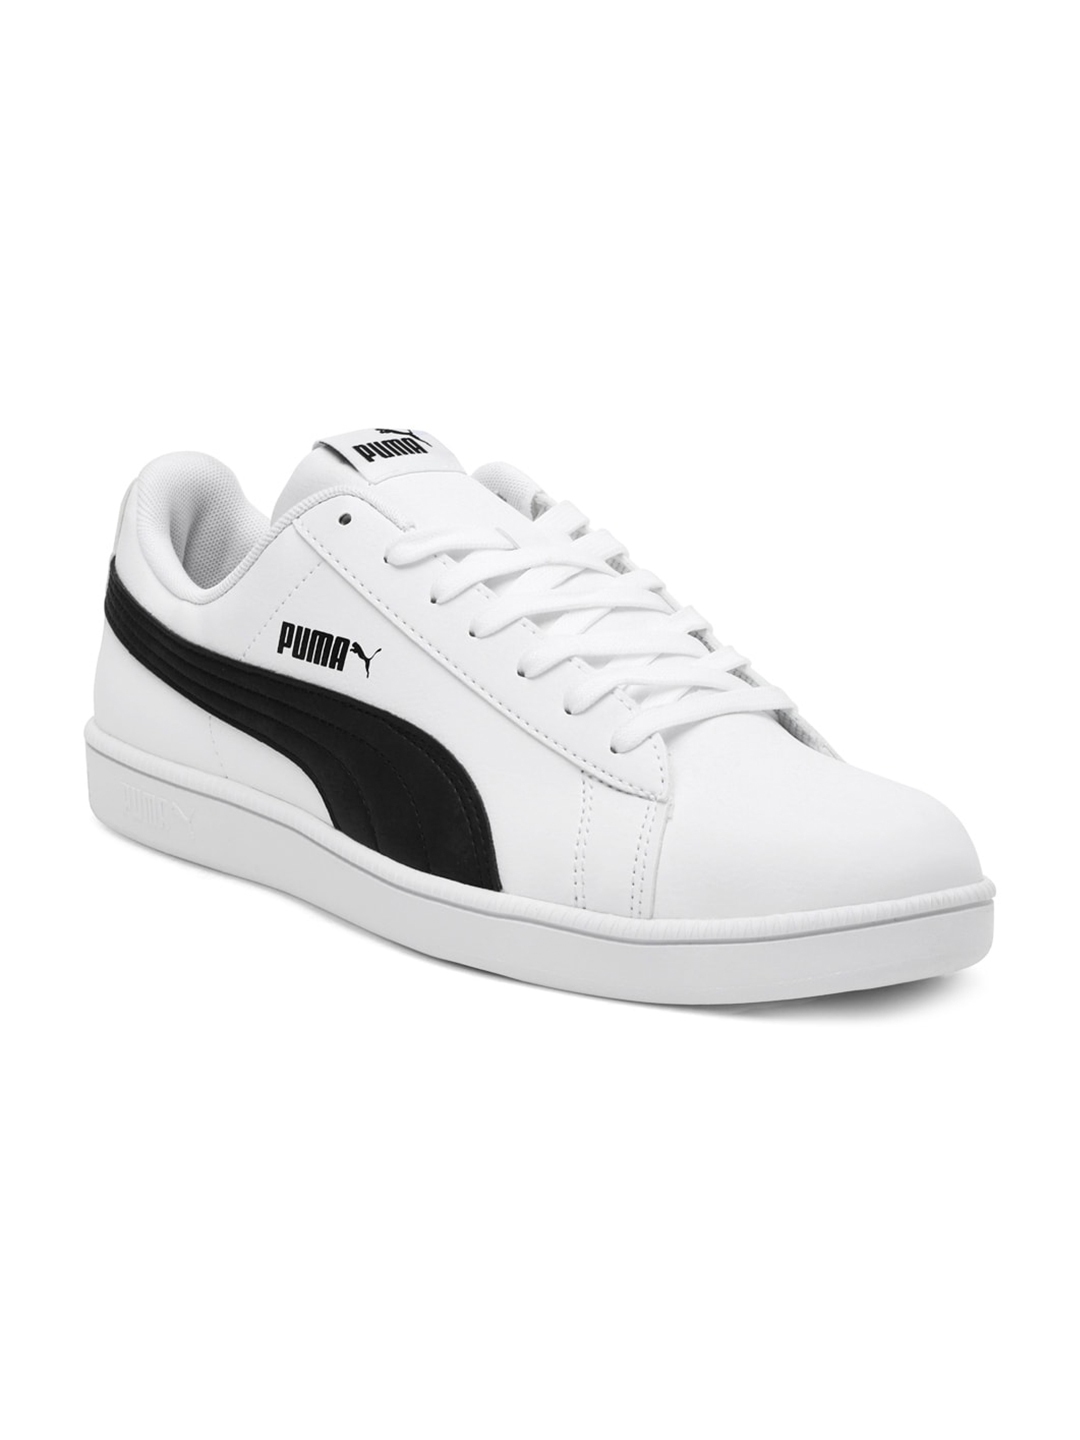 Buy Puma Unisex White Colourblocked Up Sneakers - Casual Shoes for ...